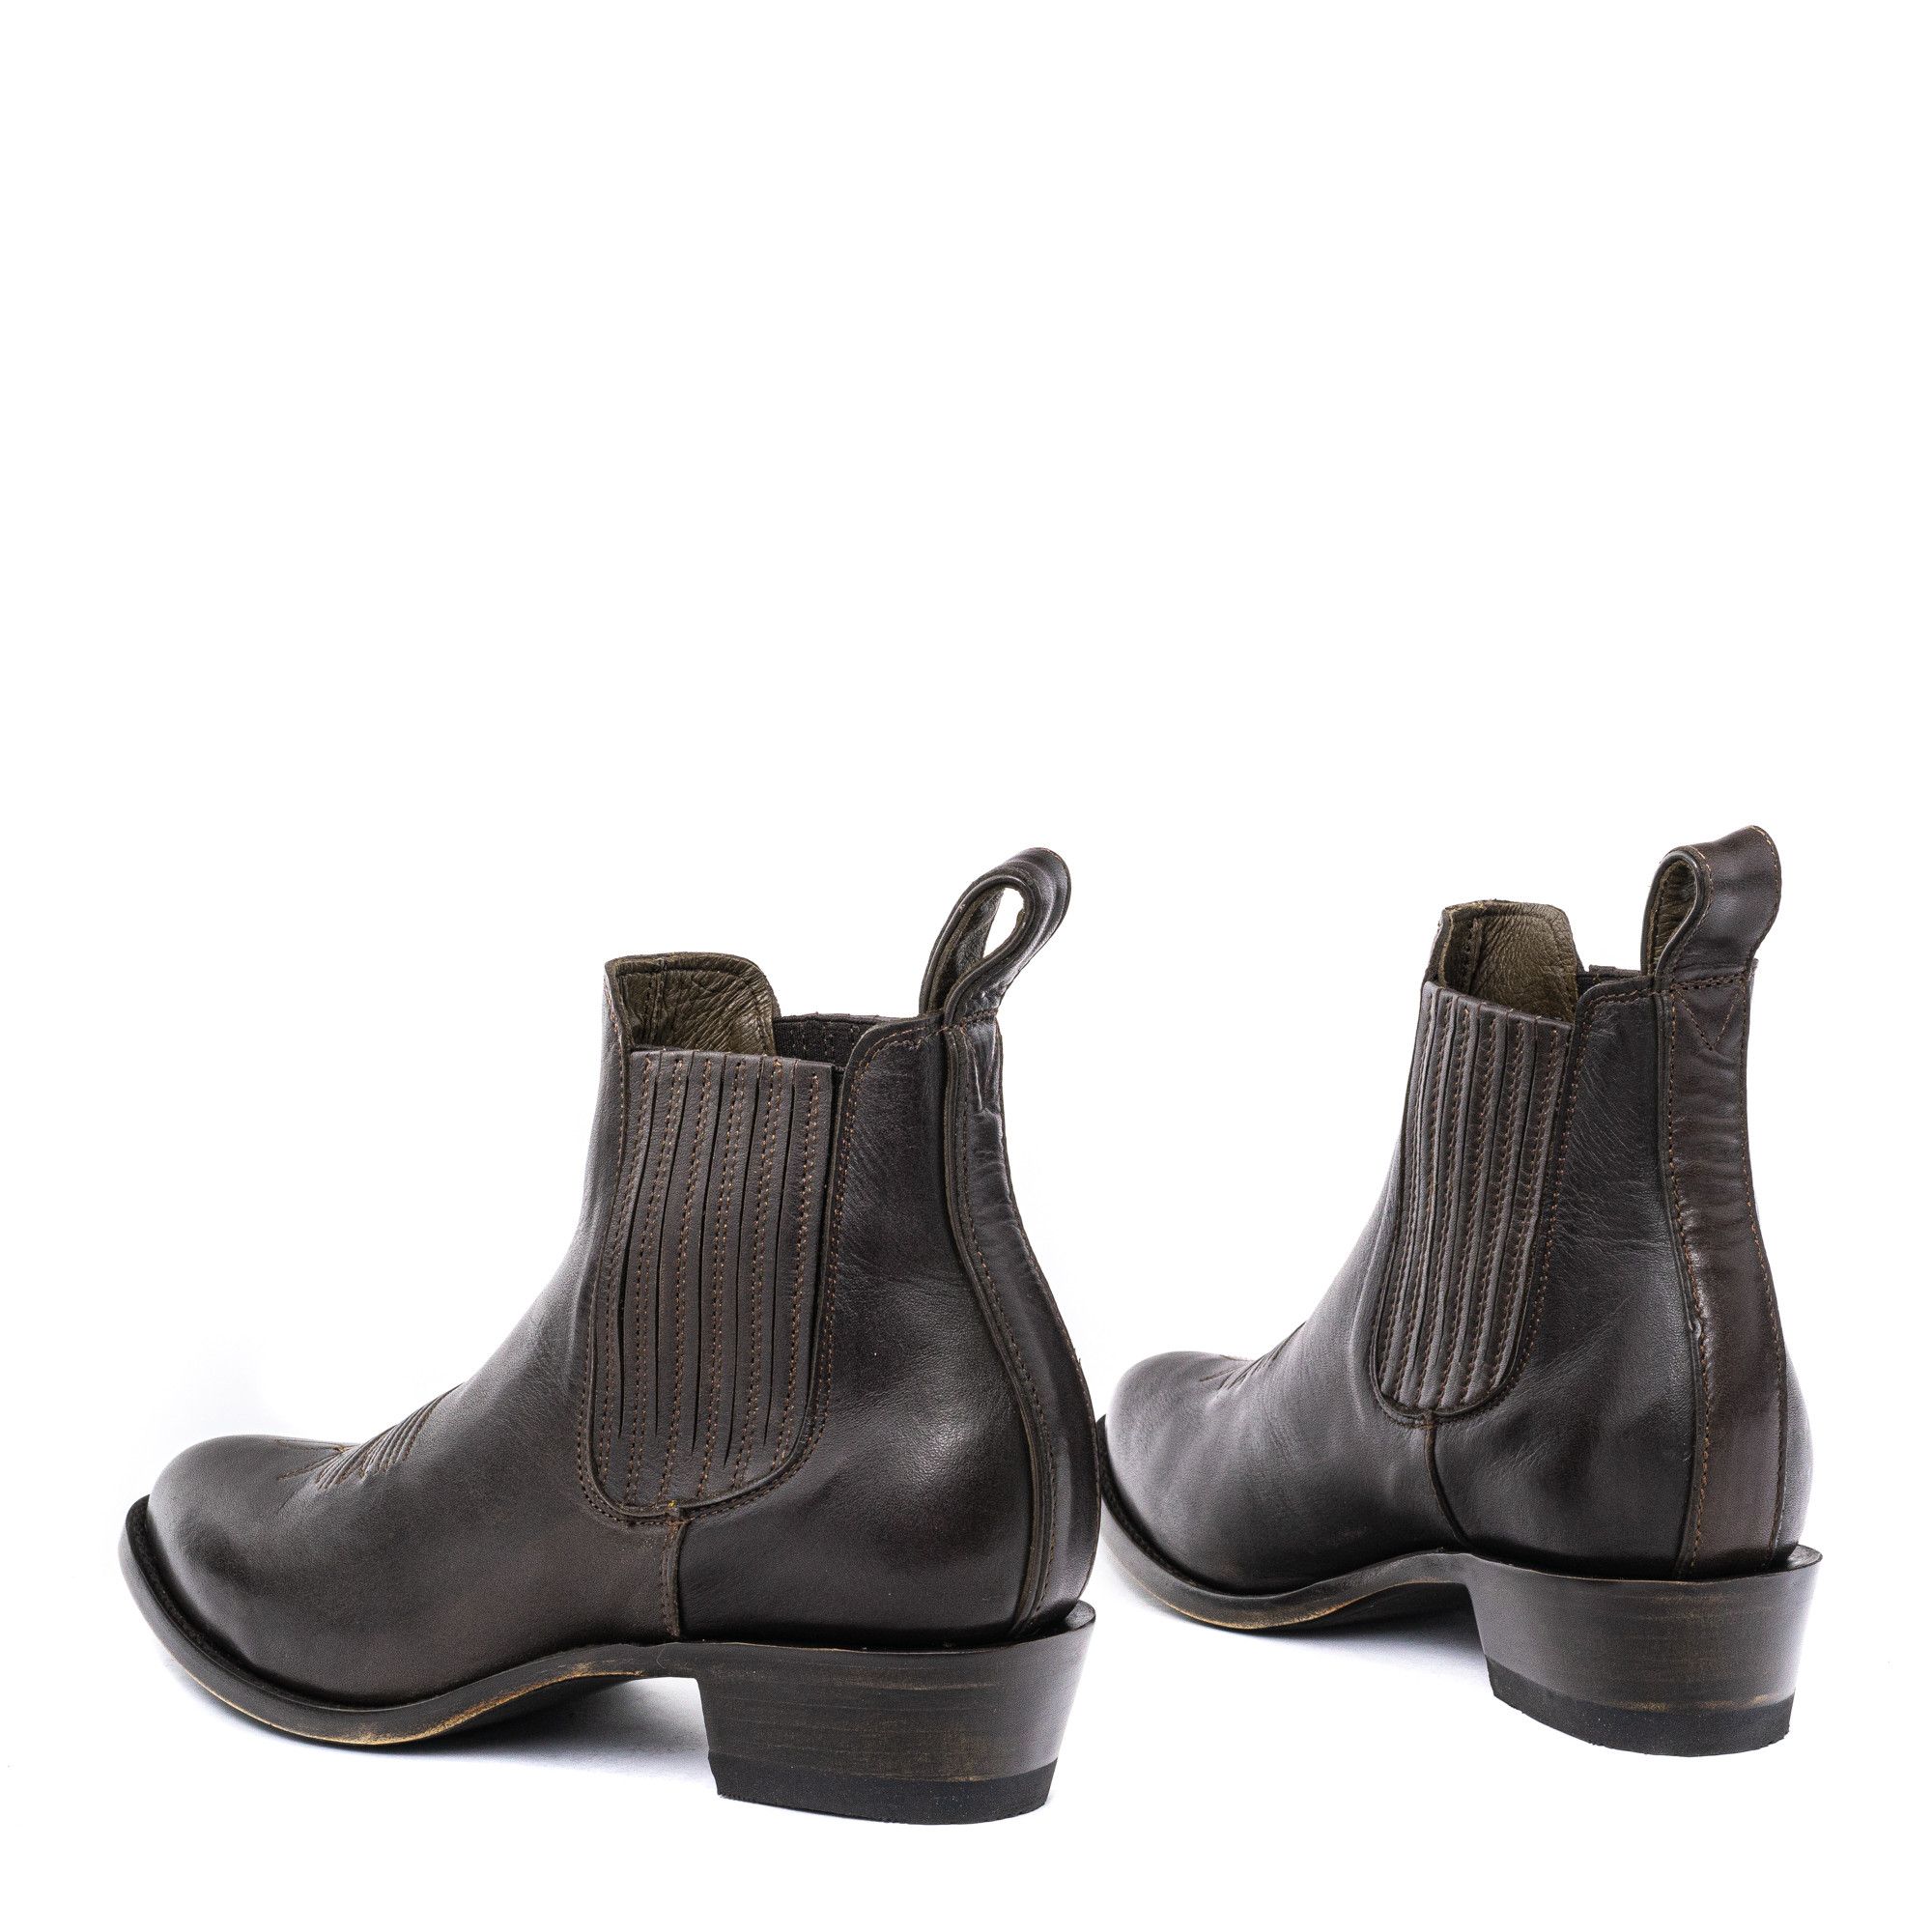 ESTUDIO BIS CHOCO RANCHEIRO ROUNDED TOE ANKLE BOOTS WITH COWBOY      STYLE STITCHING AND ELASTICIZED SIDES PANEL     Total heel 